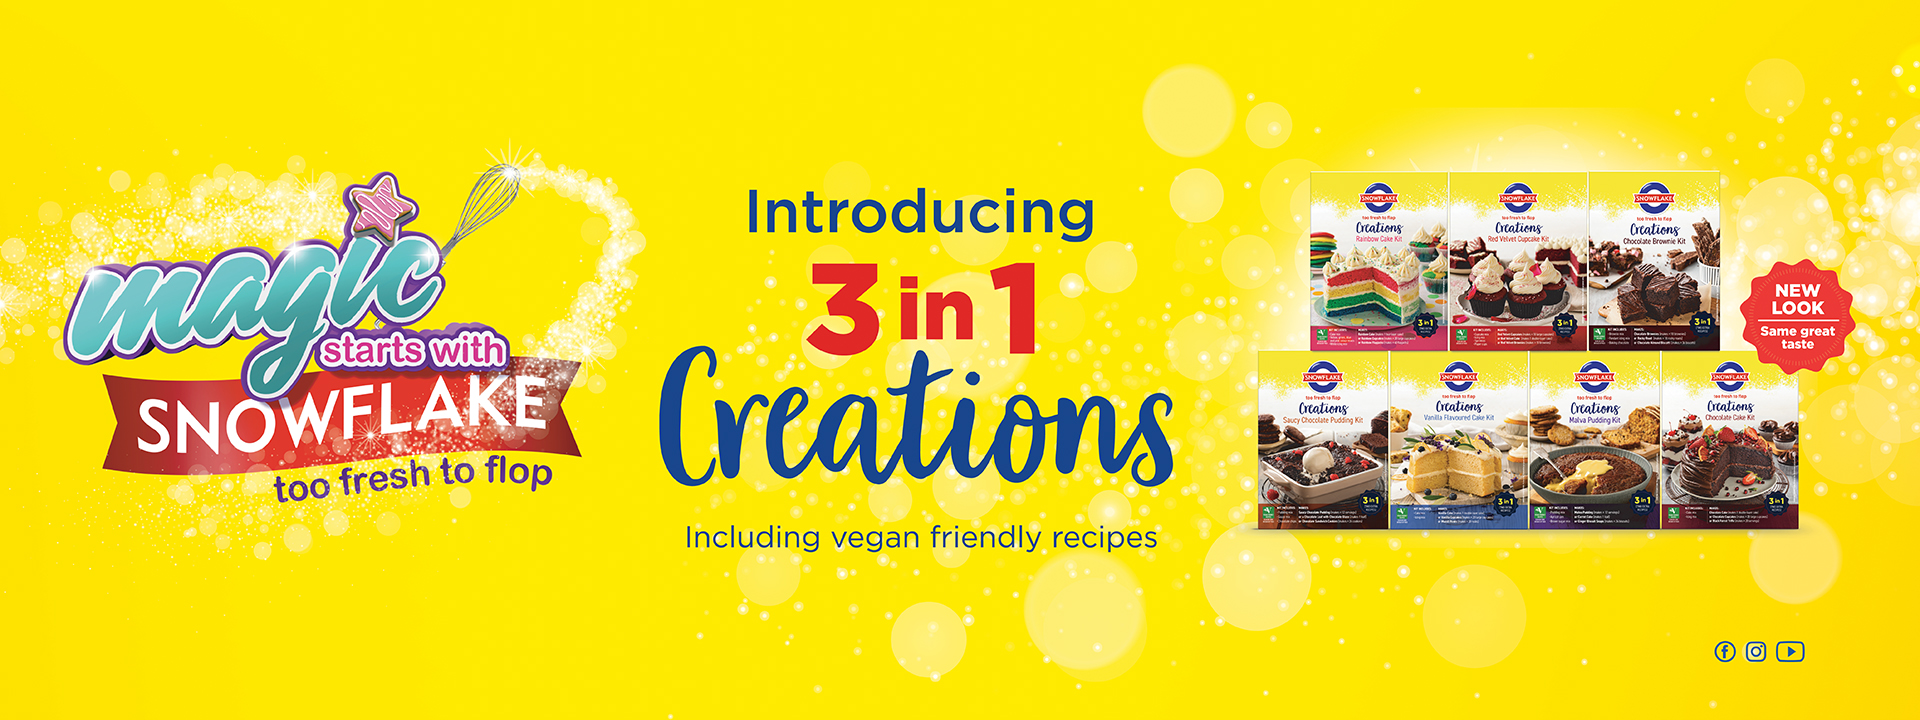 Introducing 3-in-1 Creations